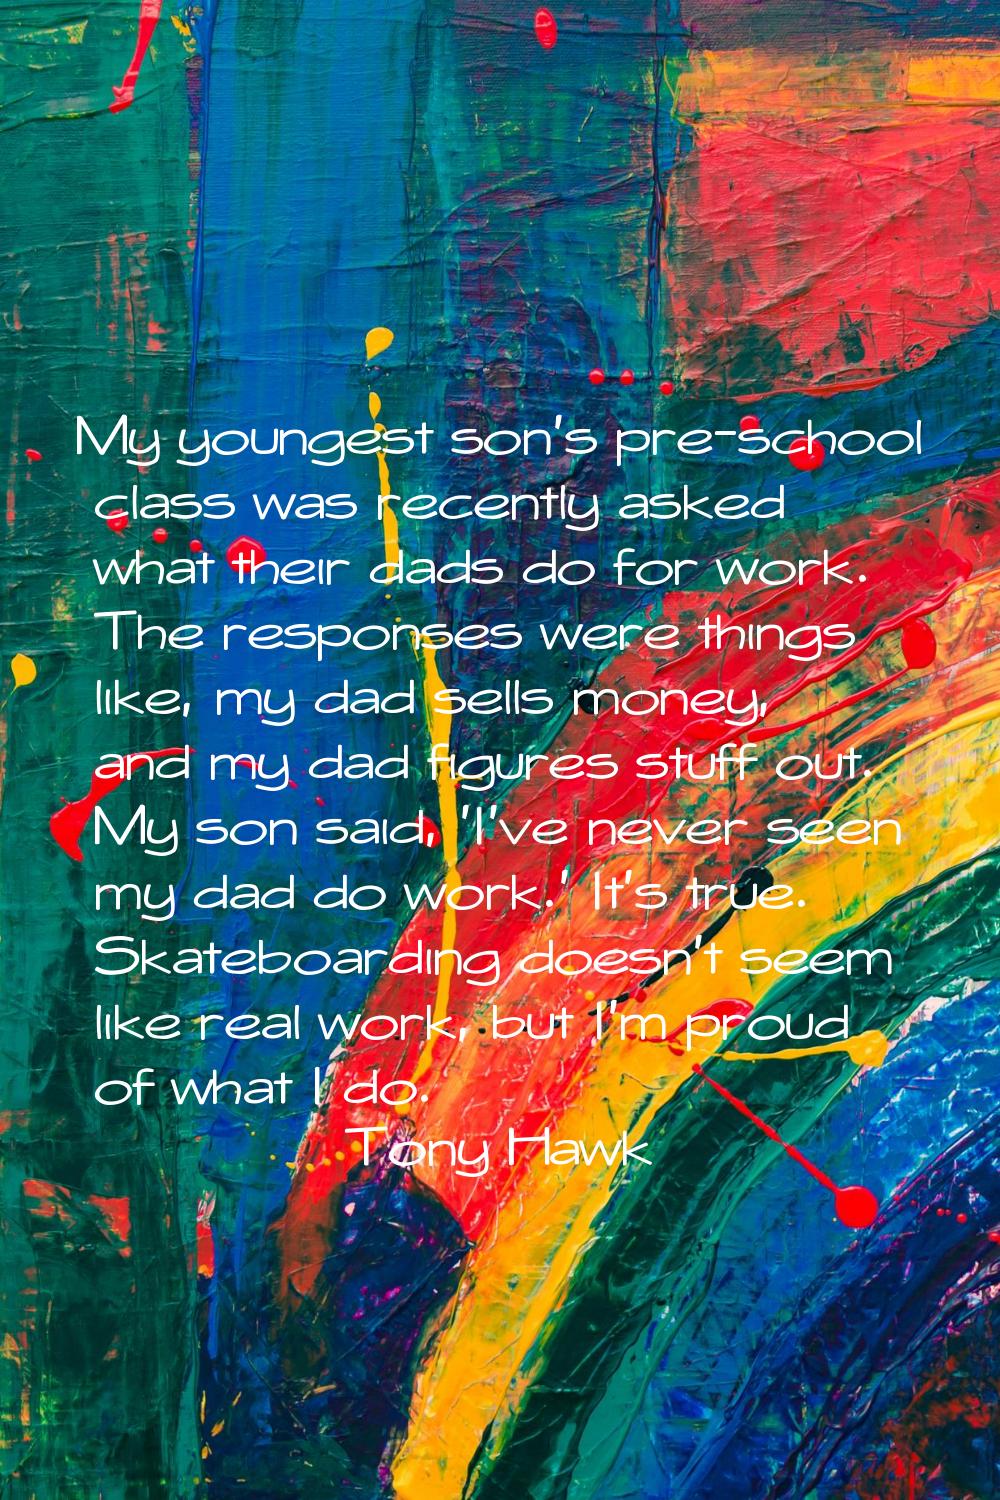 My youngest son's pre-school class was recently asked what their dads do for work. The responses we